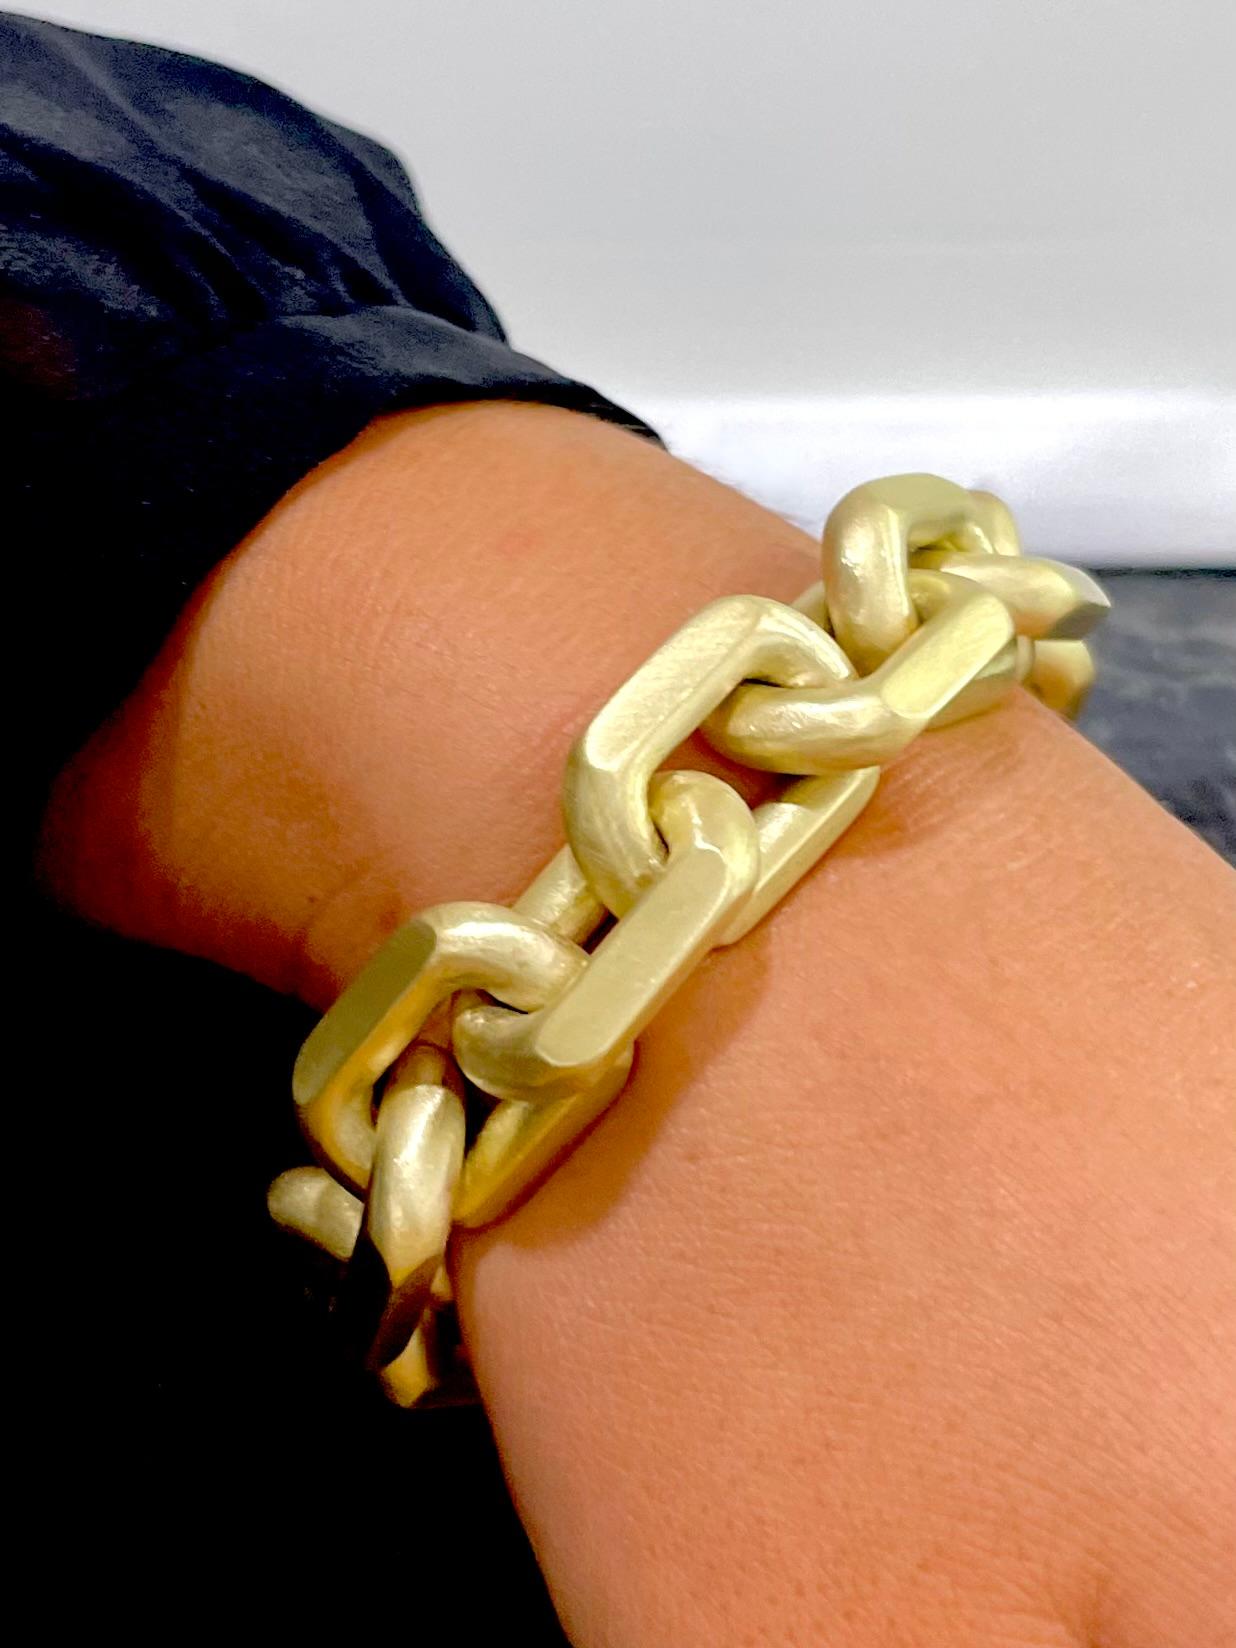 A one-of-a-kind stunner, Faye Kim's handcrafted 18 Karat Gold Knife Edge Link Bracelet is quite substantial in weight and style. Each matte-finished link is has been masterfully designed to connect seamlessly from one to the next, and is completed